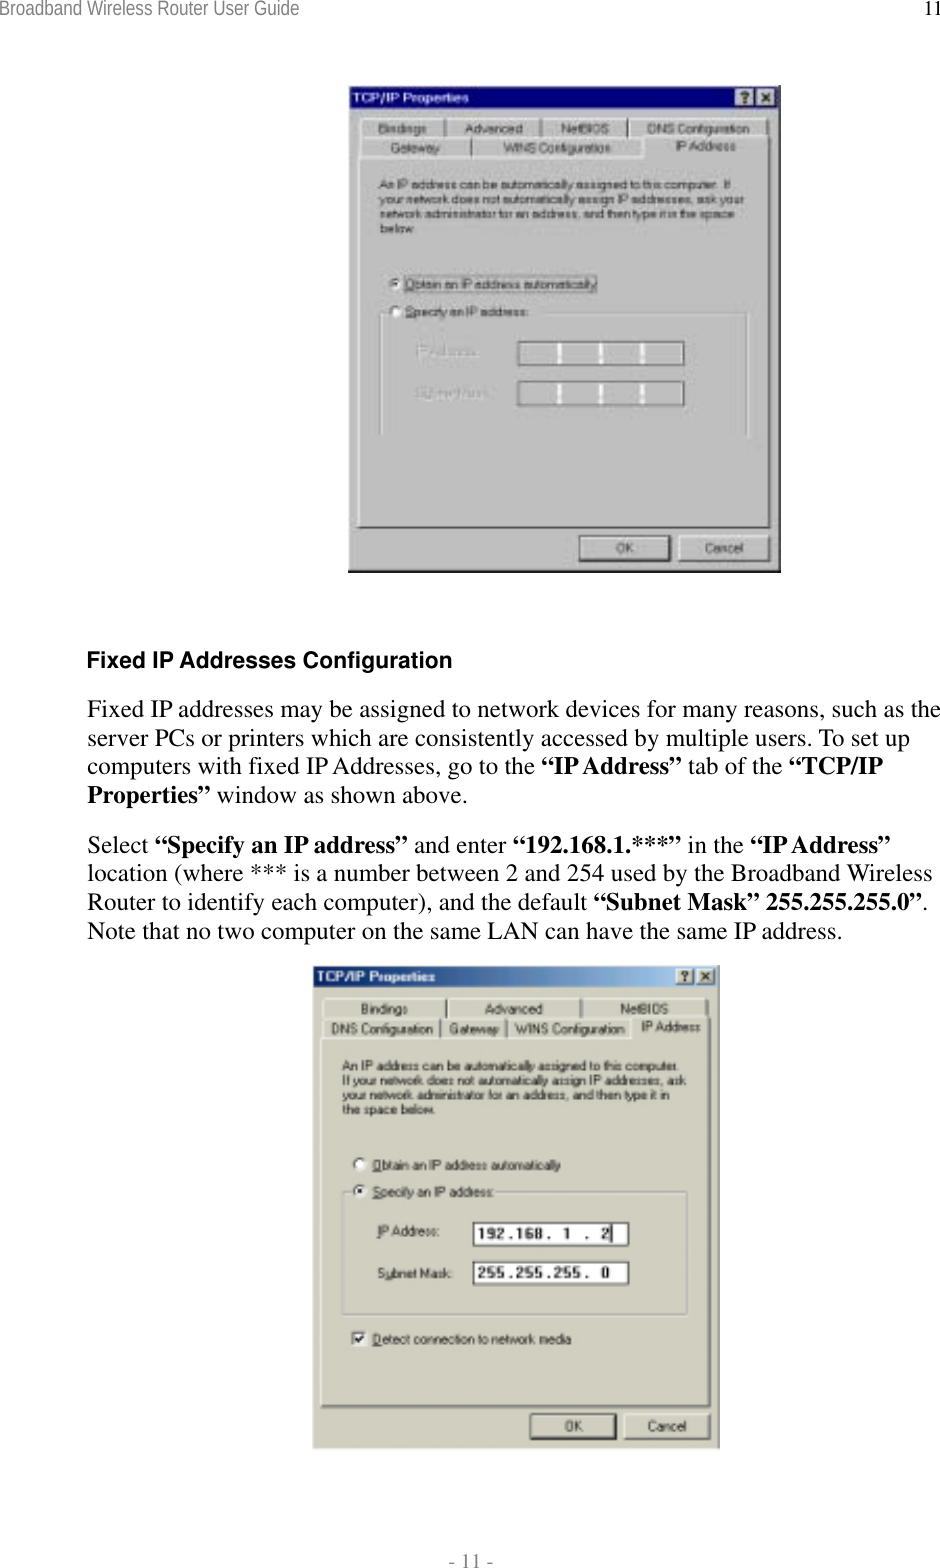 Broadband Wireless Router User Guide  - 11 - 11  Fixed IP Addresses Configuration Fixed IP addresses may be assigned to network devices for many reasons, such as the server PCs or printers which are consistently accessed by multiple users. To set up computers with fixed IP Addresses, go to the “IP Address” tab of the “TCP/IP Properties” window as shown above.  Select “Specify an IP address” and enter “192.168.1.***” in the “IP Address” location (where *** is a number between 2 and 254 used by the Broadband Wireless Router to identify each computer), and the default “Subnet Mask” 255.255.255.0”. Note that no two computer on the same LAN can have the same IP address.  